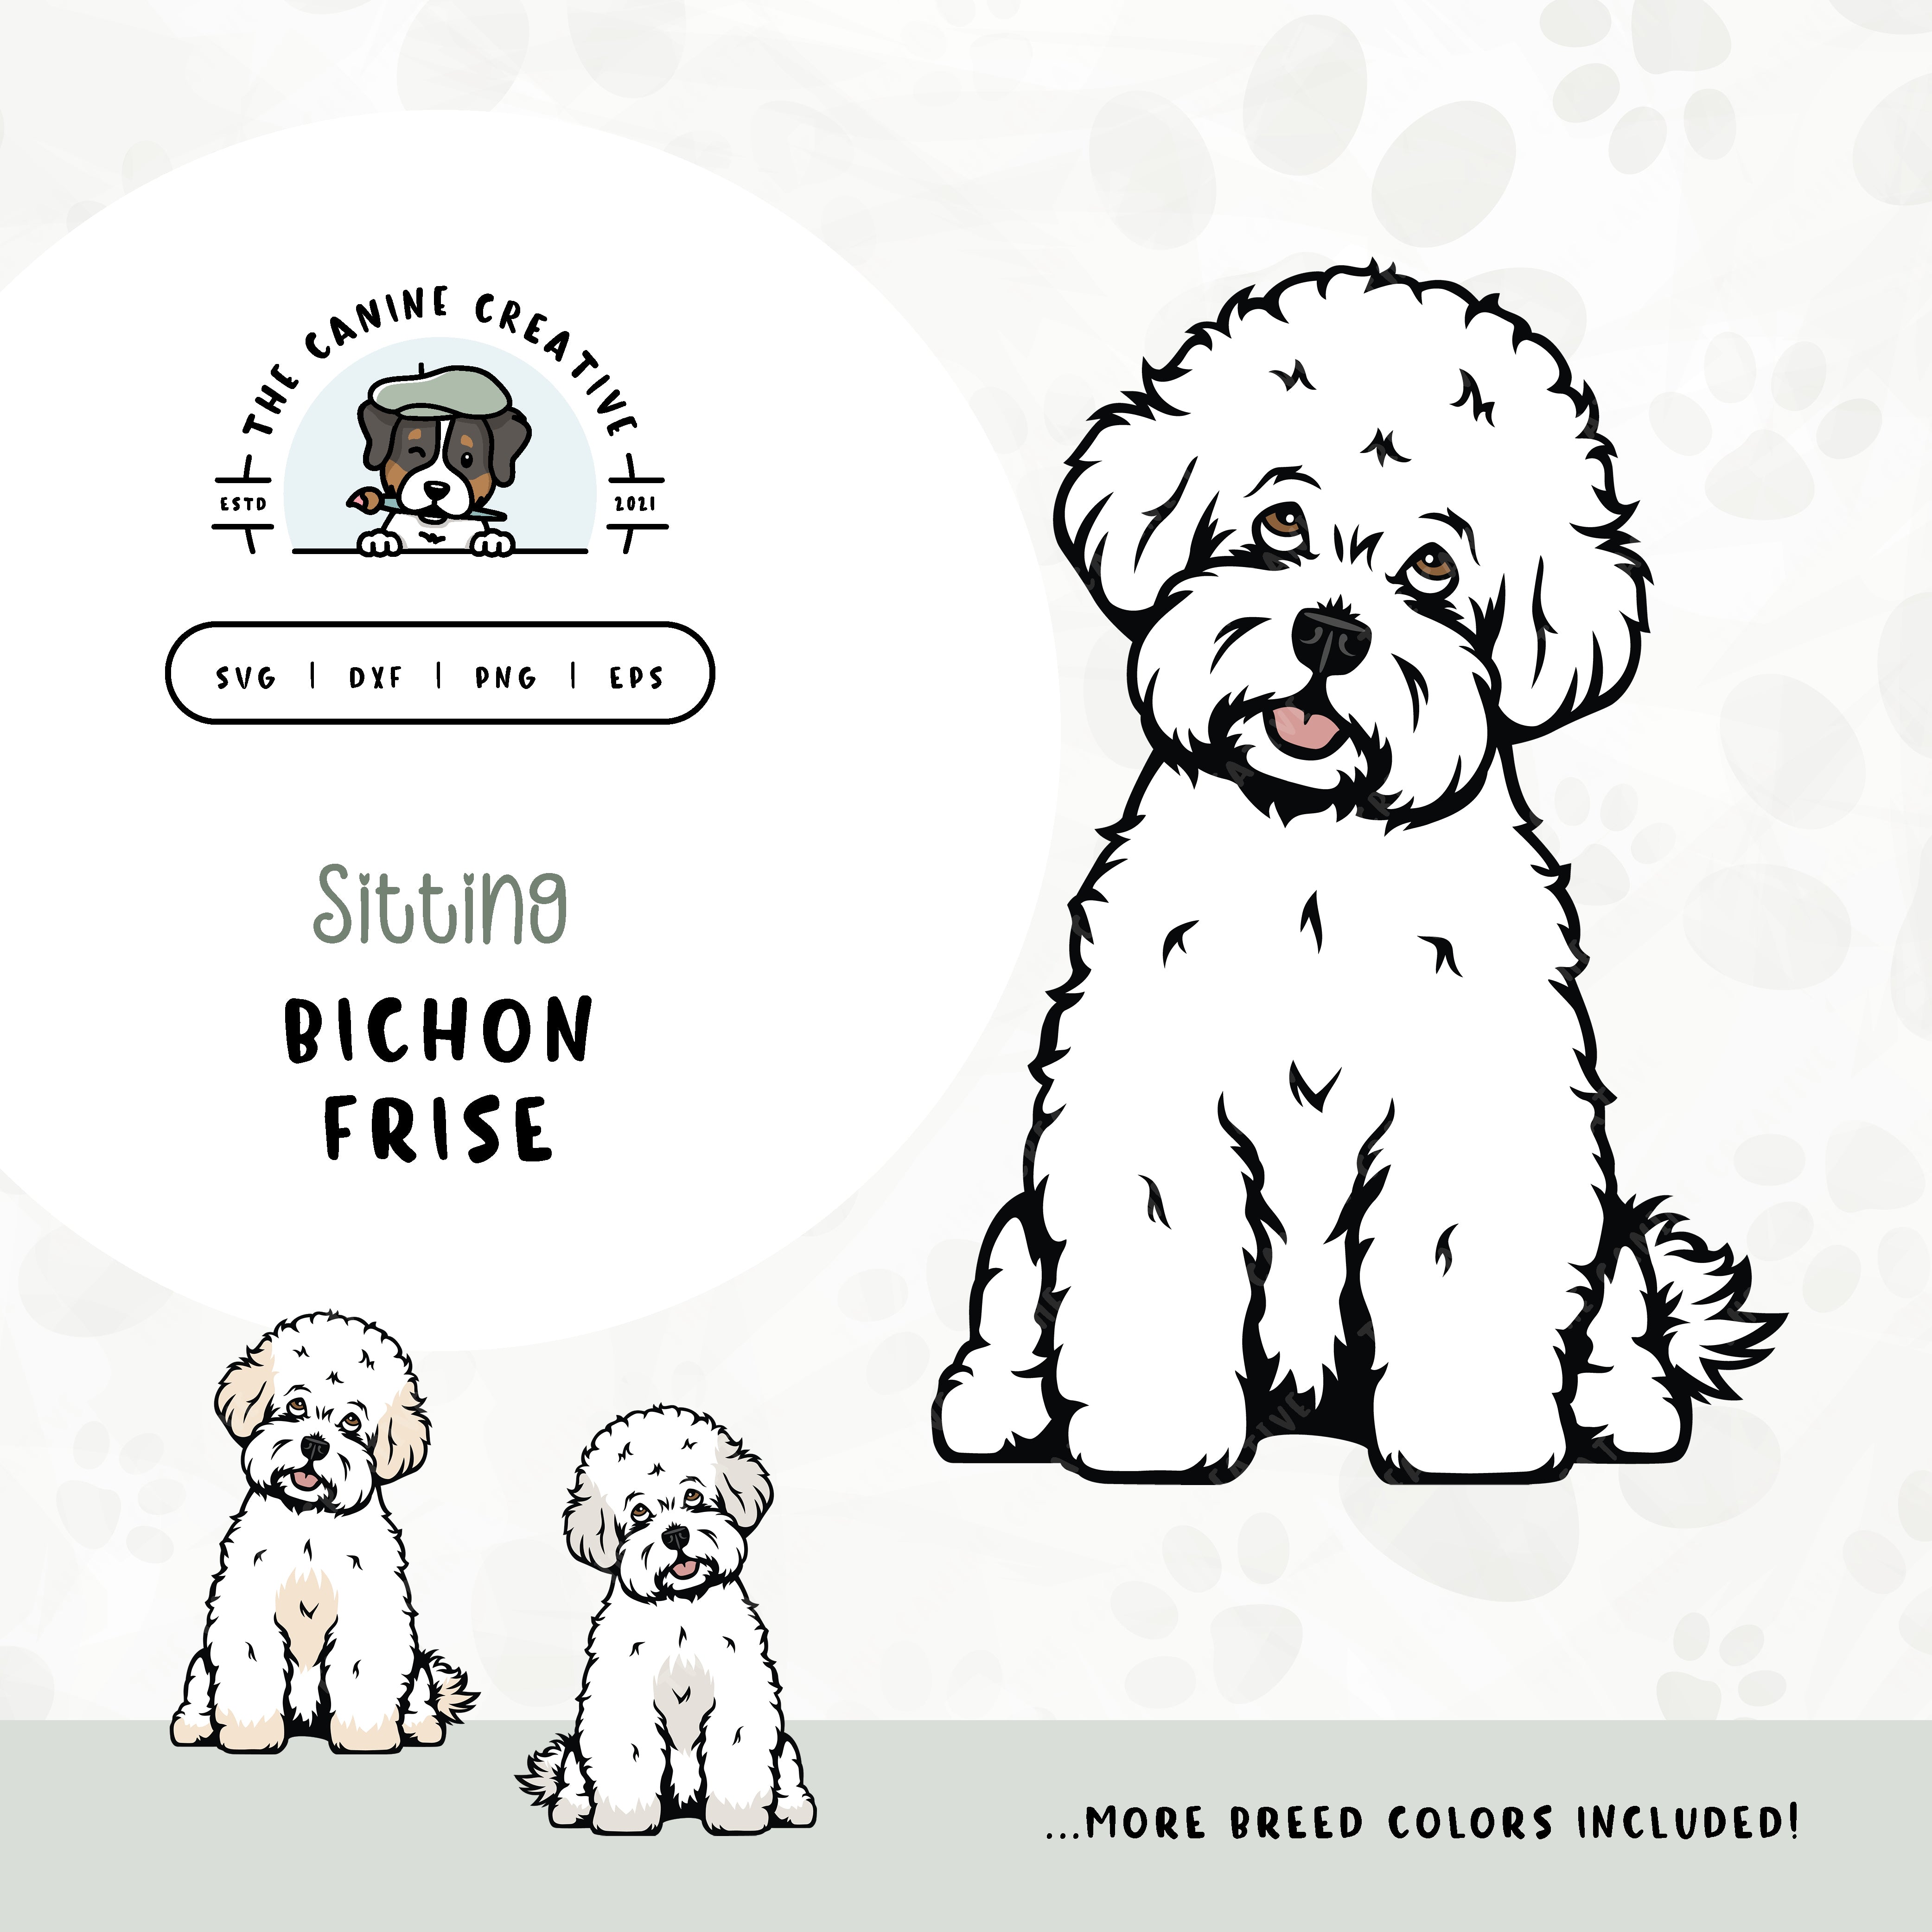 This sitting dog design features a Bichon Frise. File formats include: SVG, DXF, PNG, and EPS.